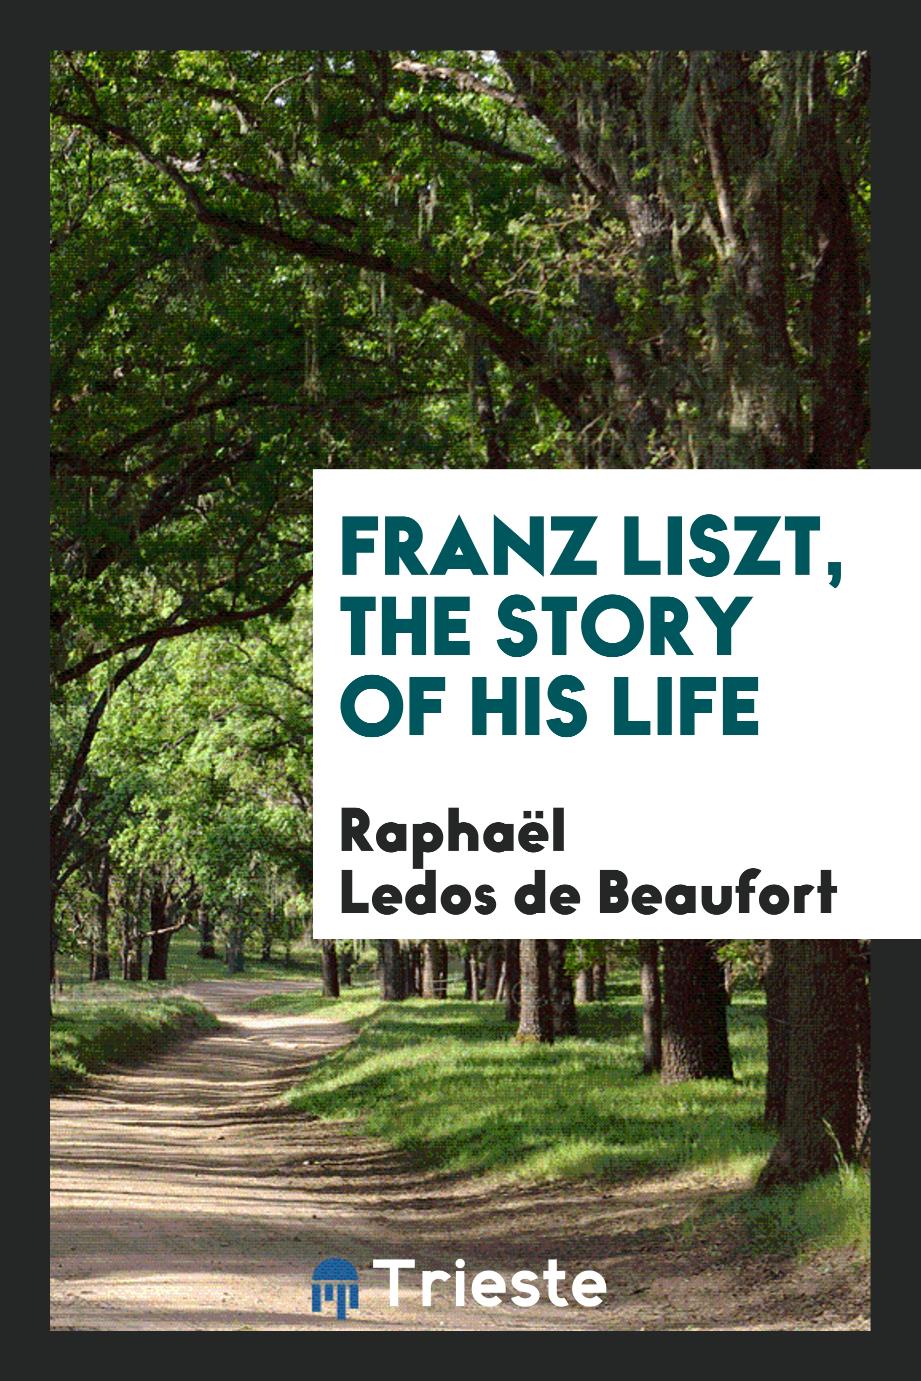 Franz Liszt, the story of his life